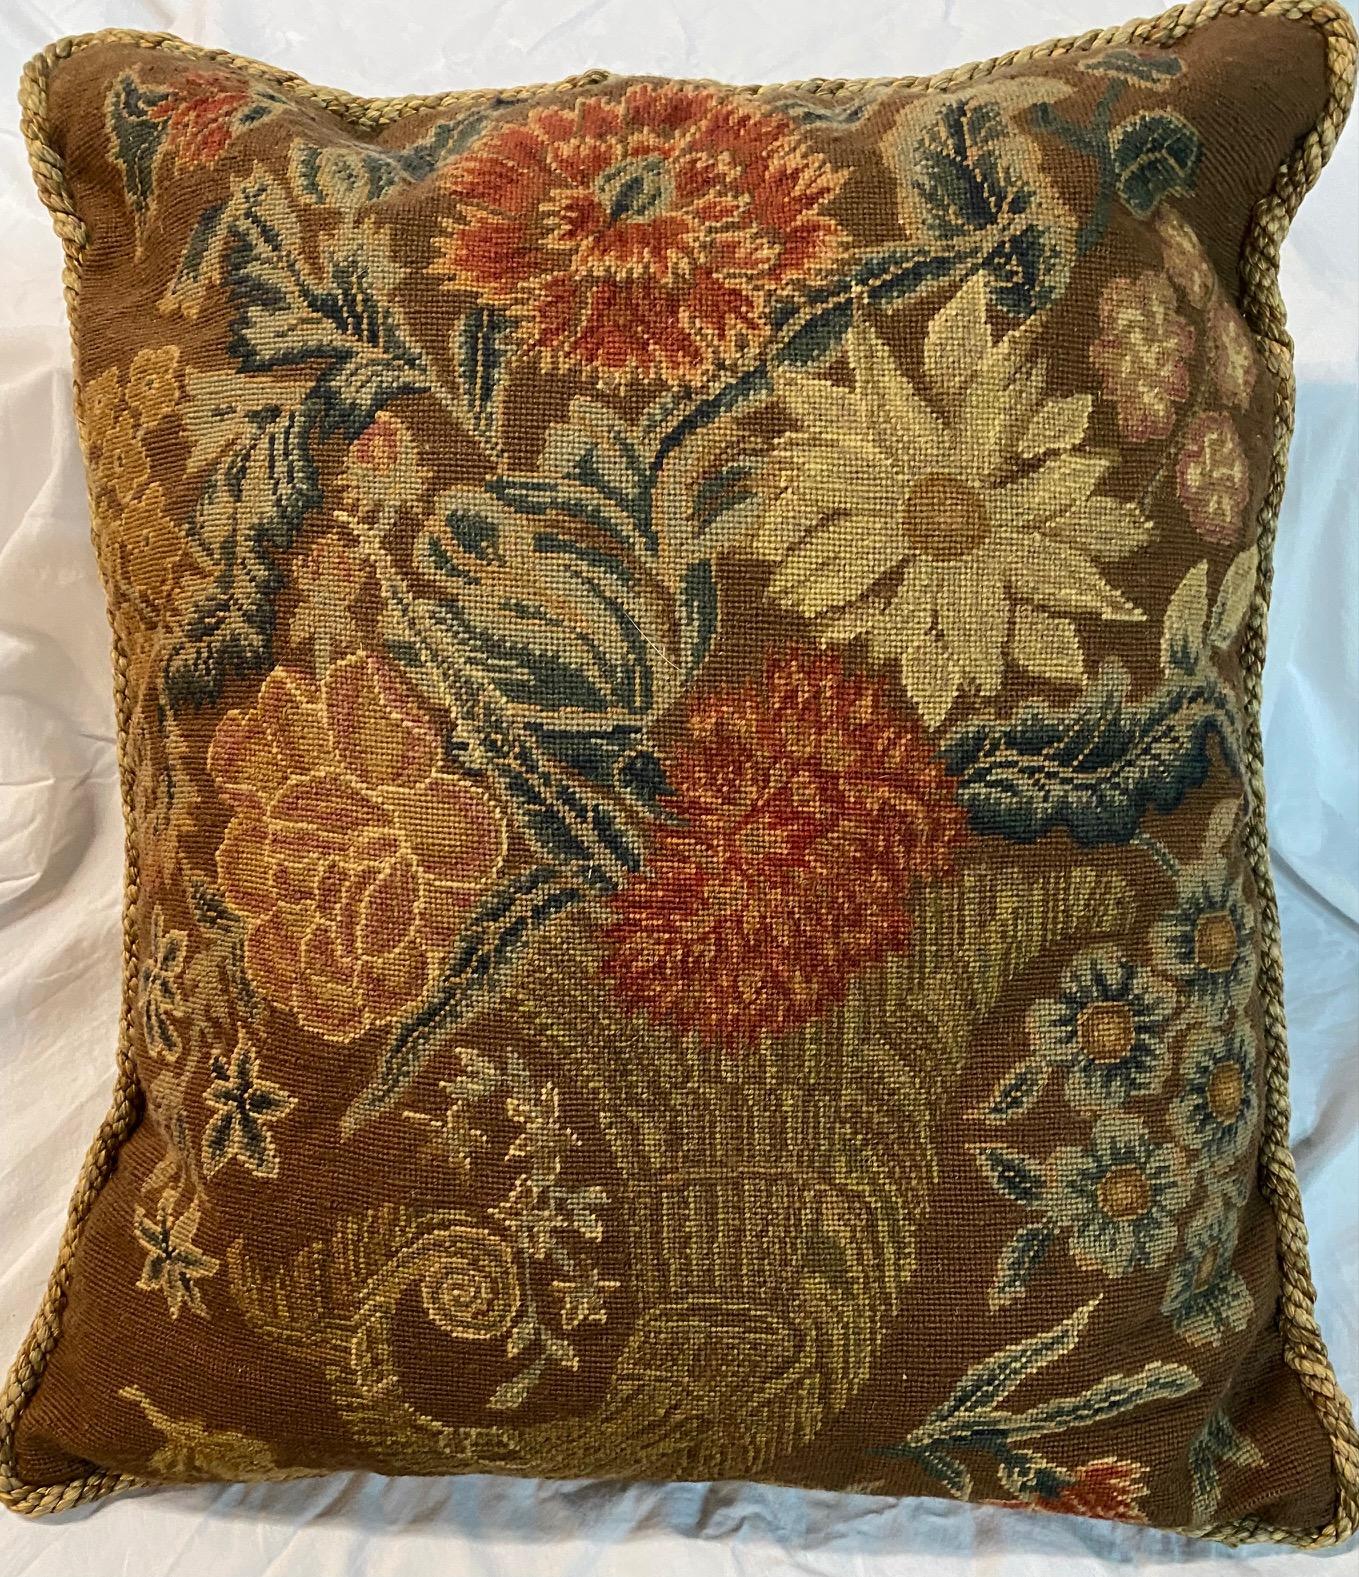 Attractive and colorful pair of antique needlework cushions with flowers in bowl and flowers in 